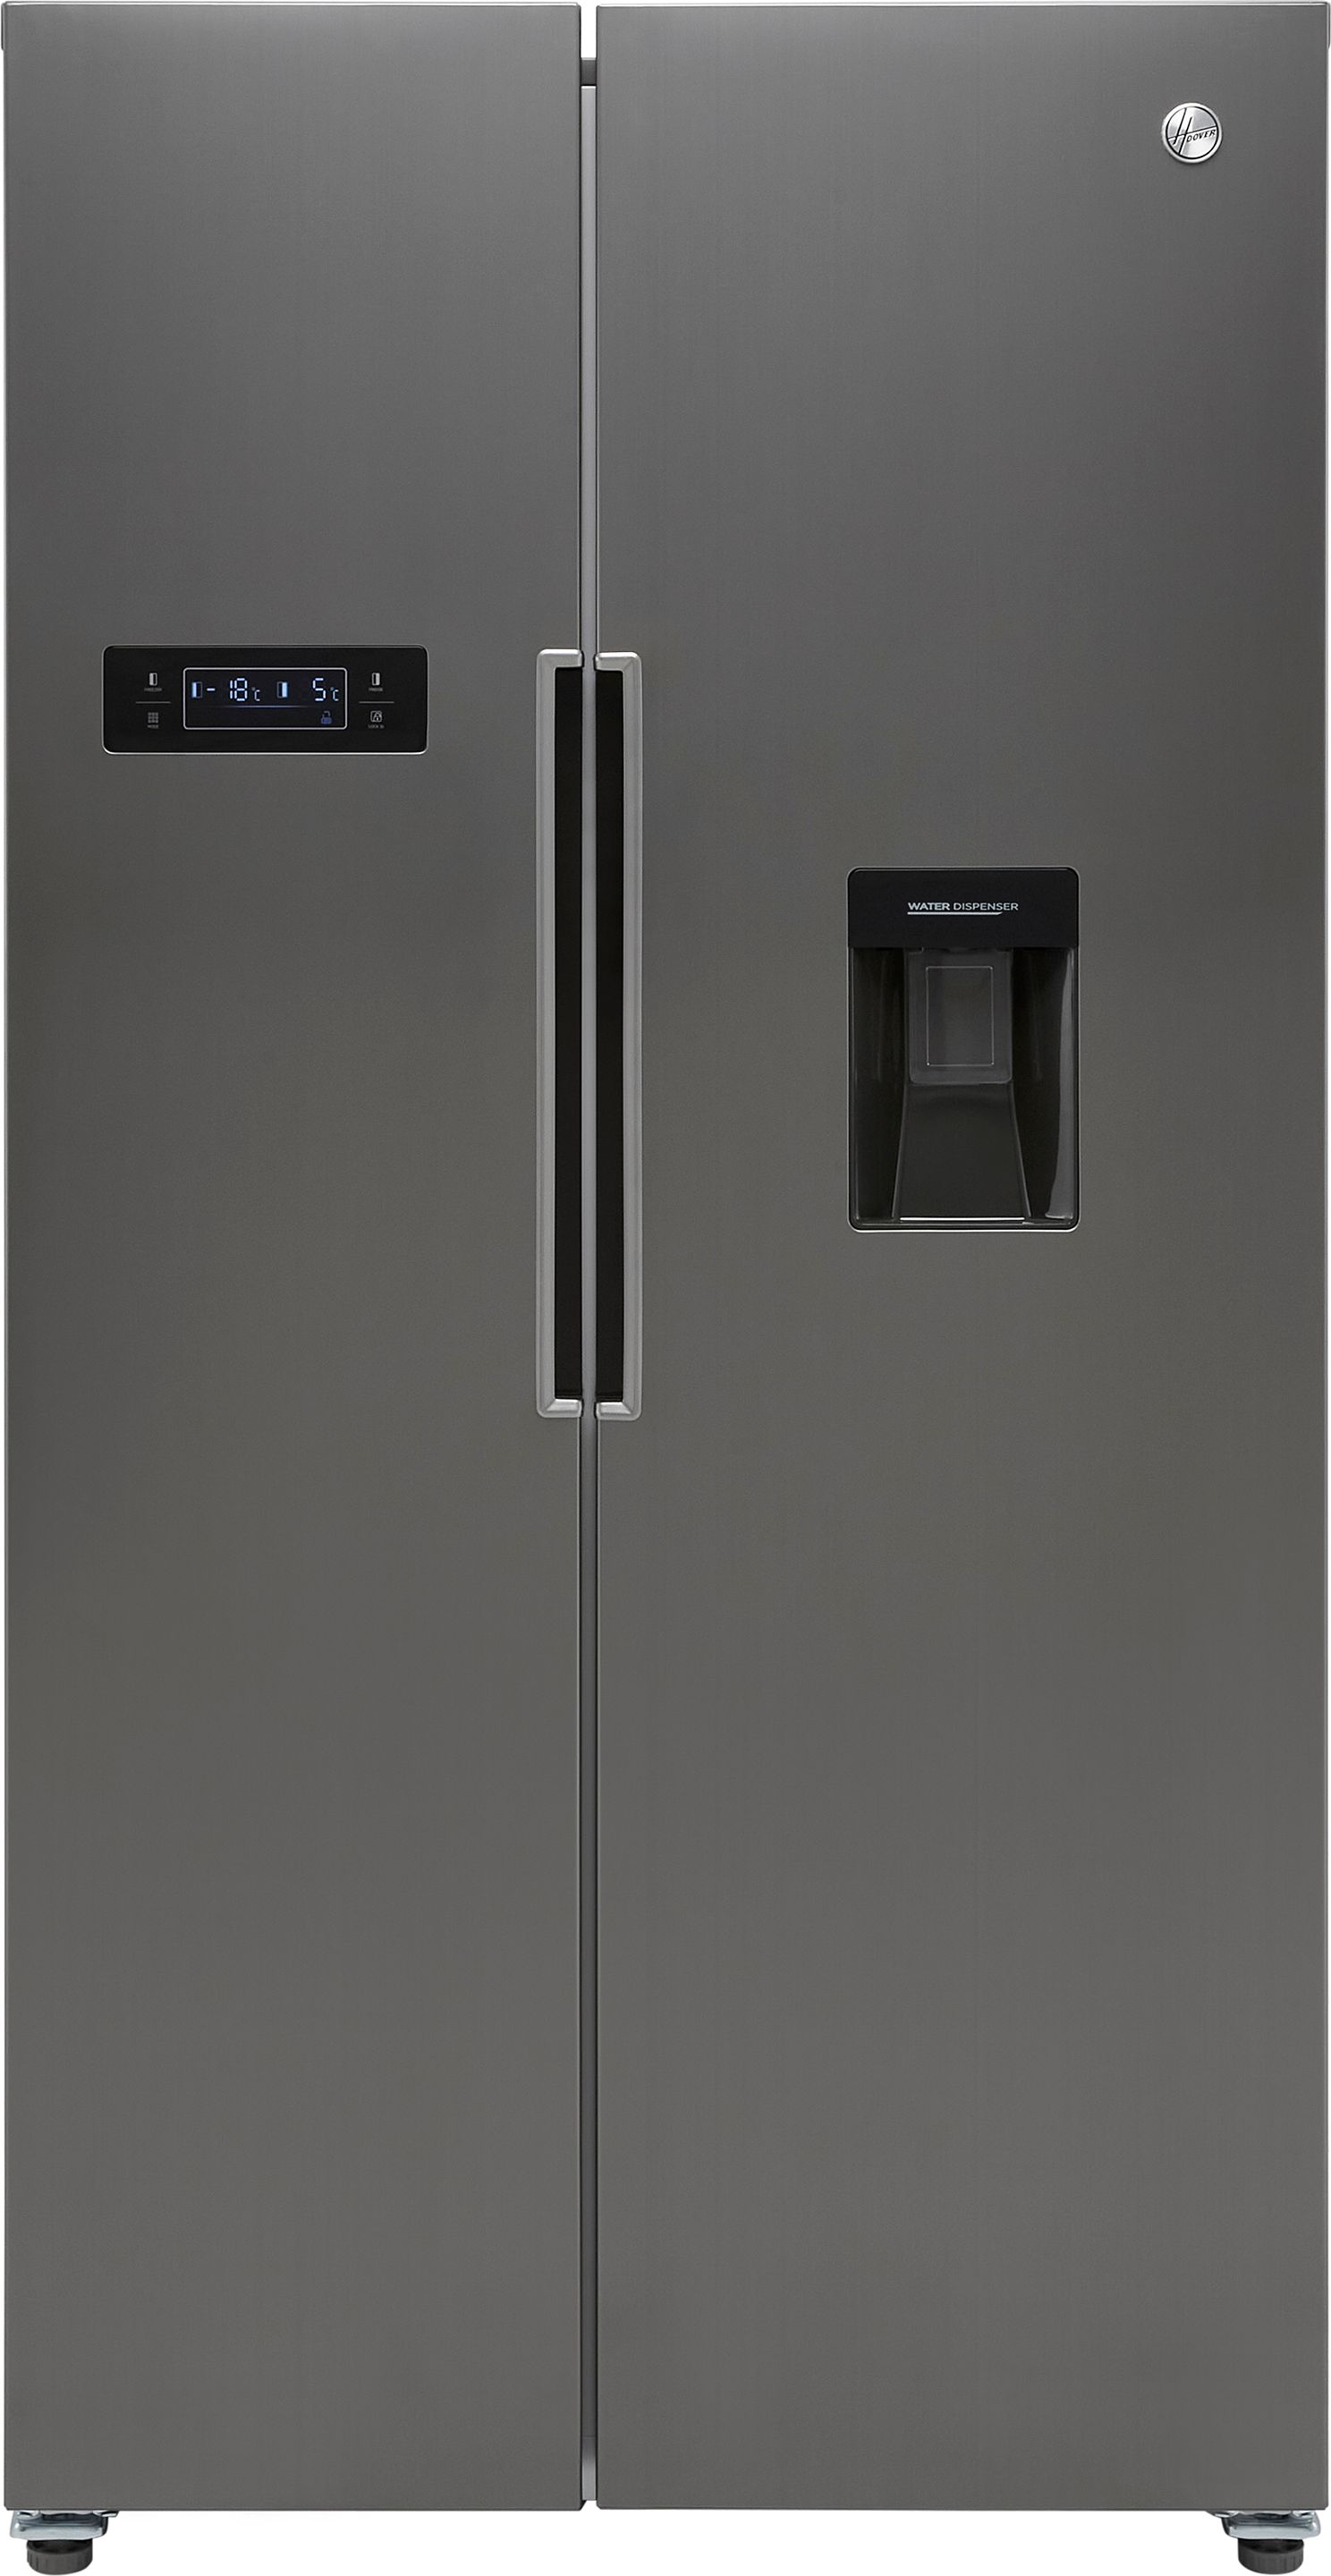 Hoover HHSBSO6174XWDK Non-Plumbed Frost Free American Fridge Freezer - Stainless Steel Effect - E Rated, Stainless Steel